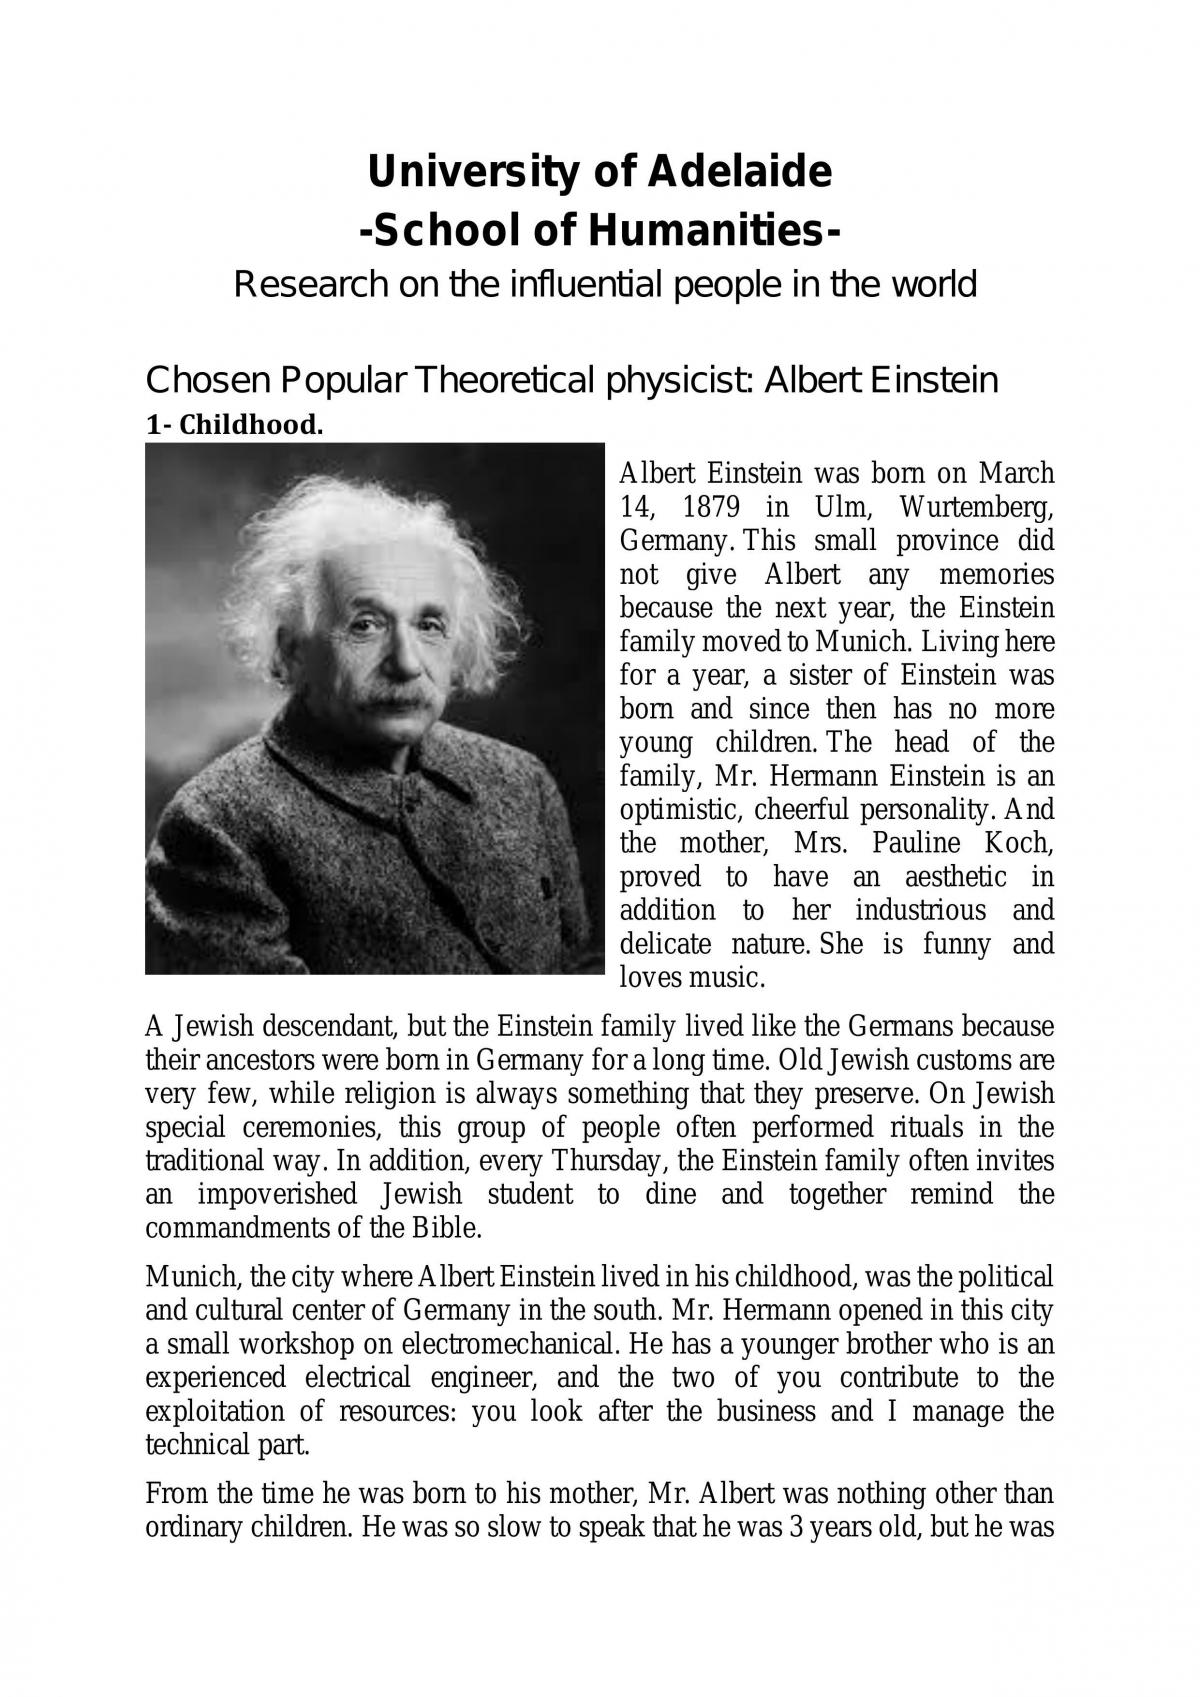 Research on the Influential People in the World - Page 1